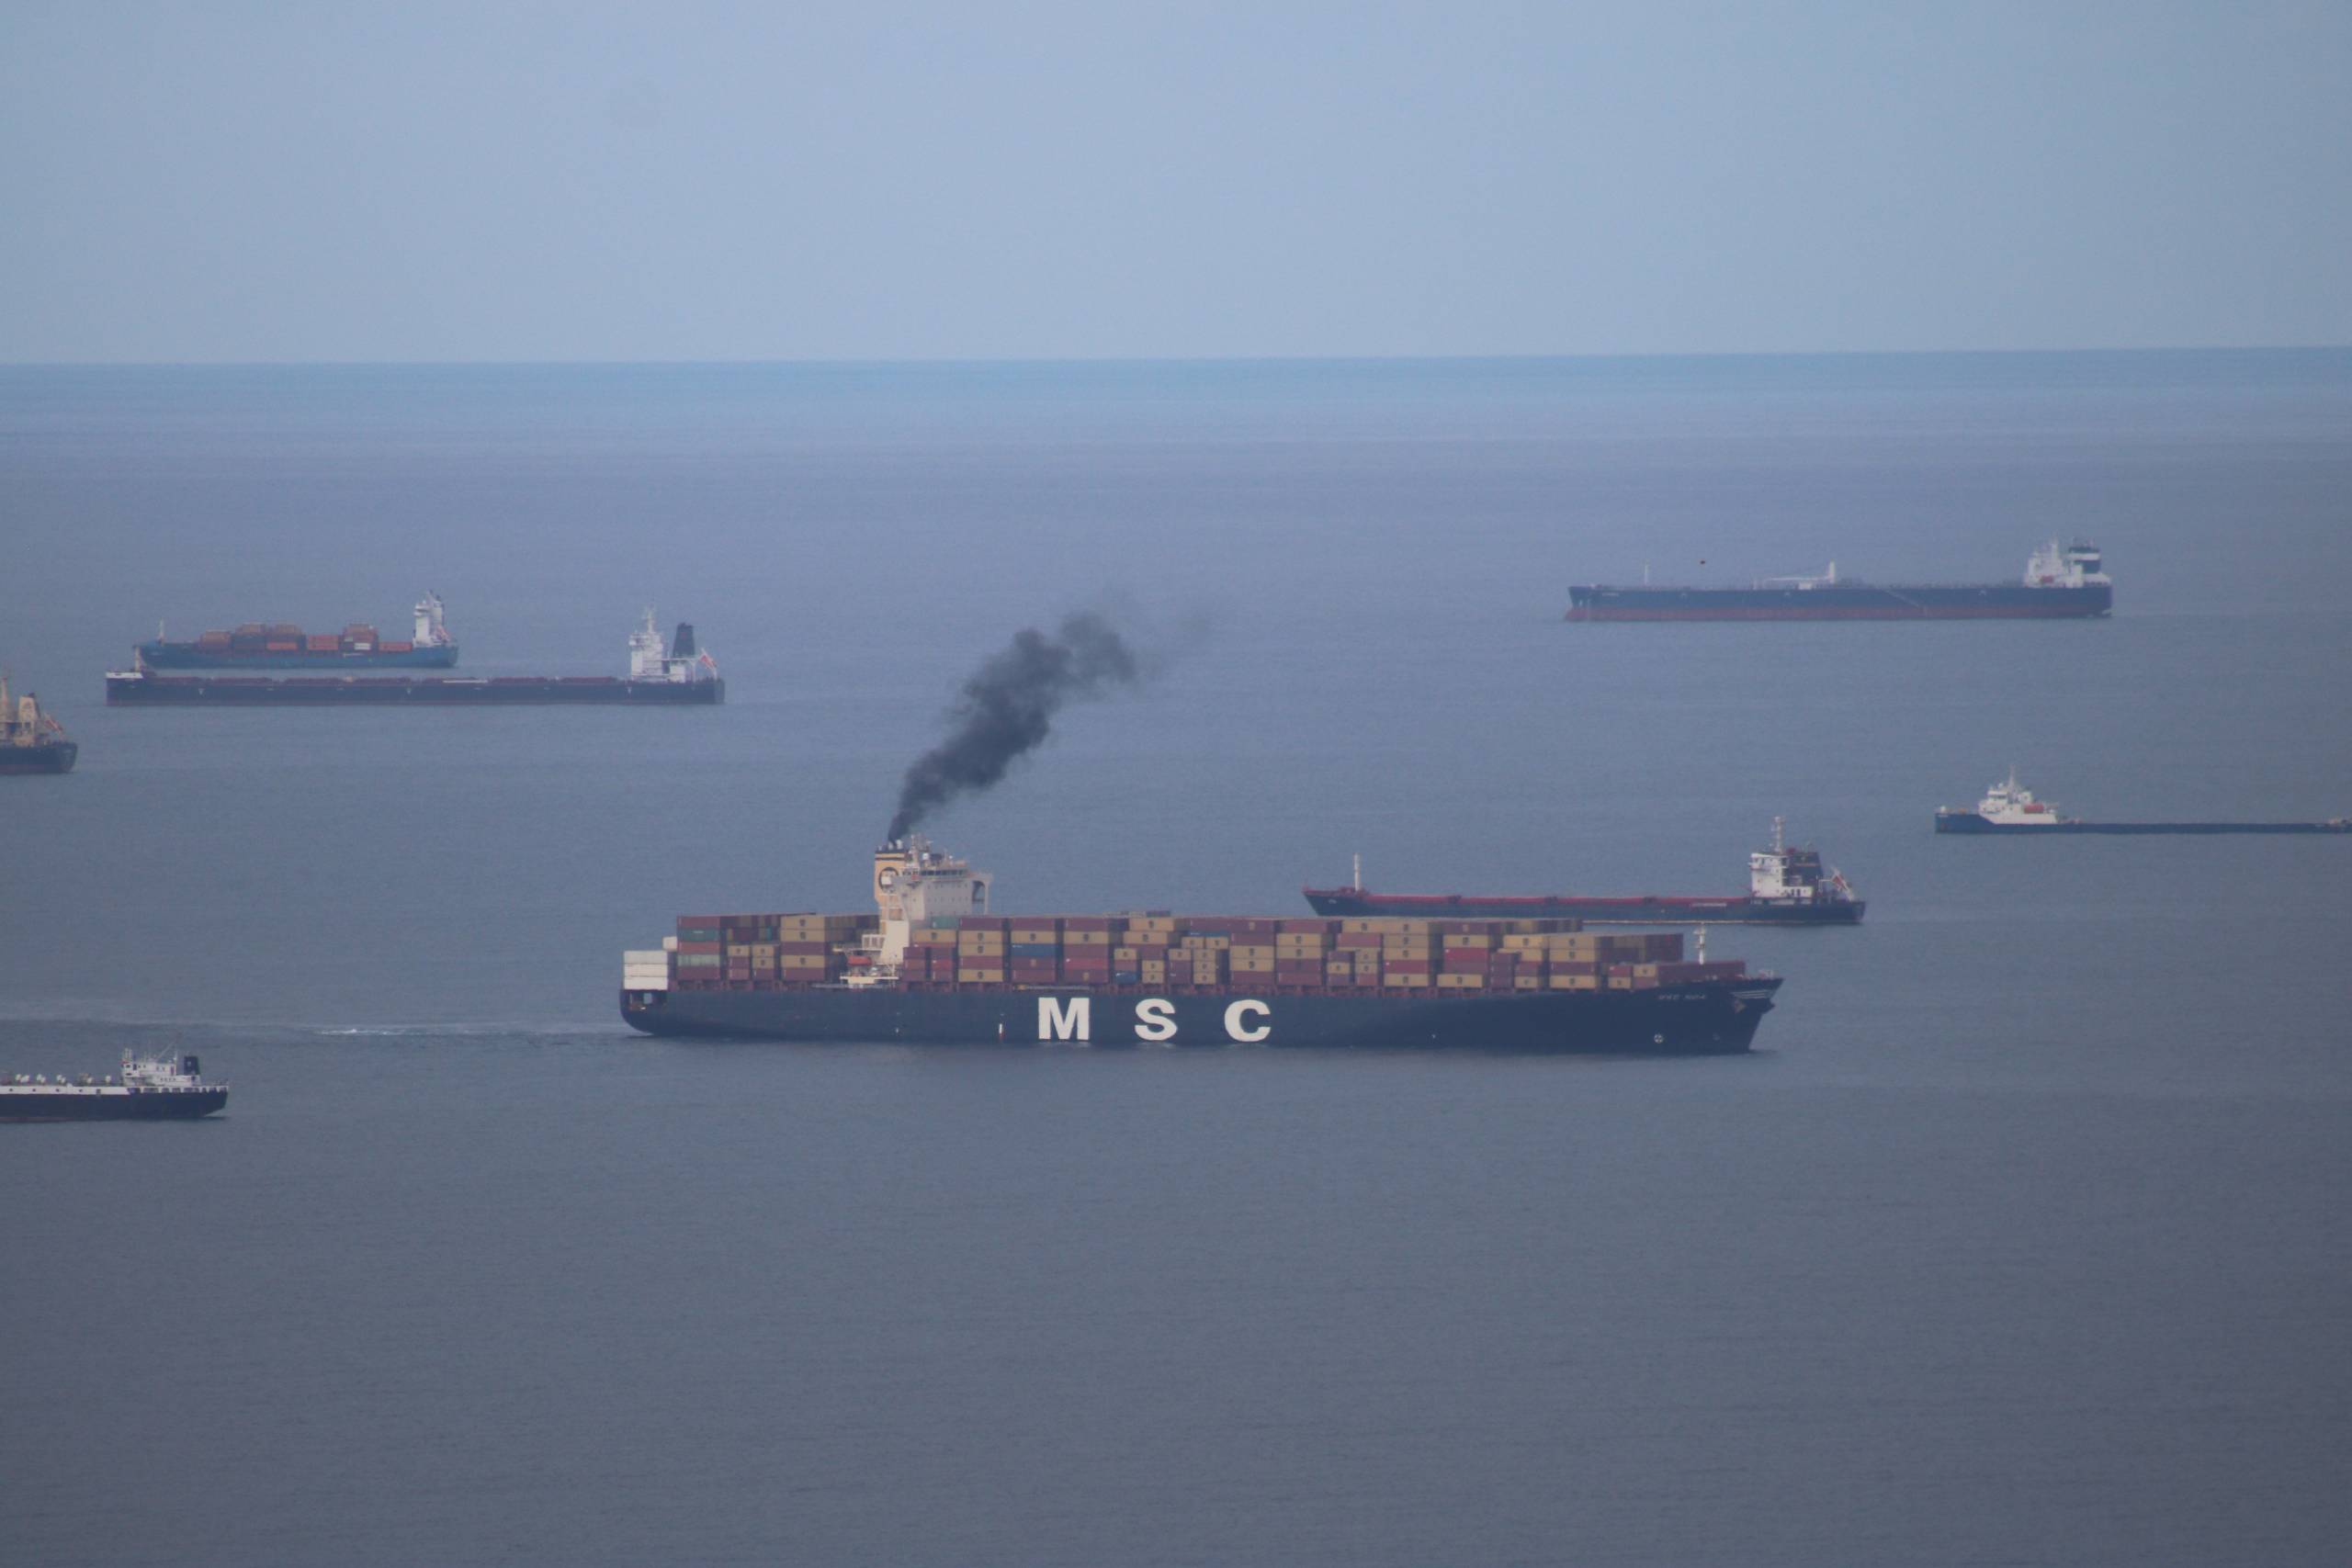 The Mediterranean Shipping Company (MSC) has been repeatedly identified as one of EU biggest polluters